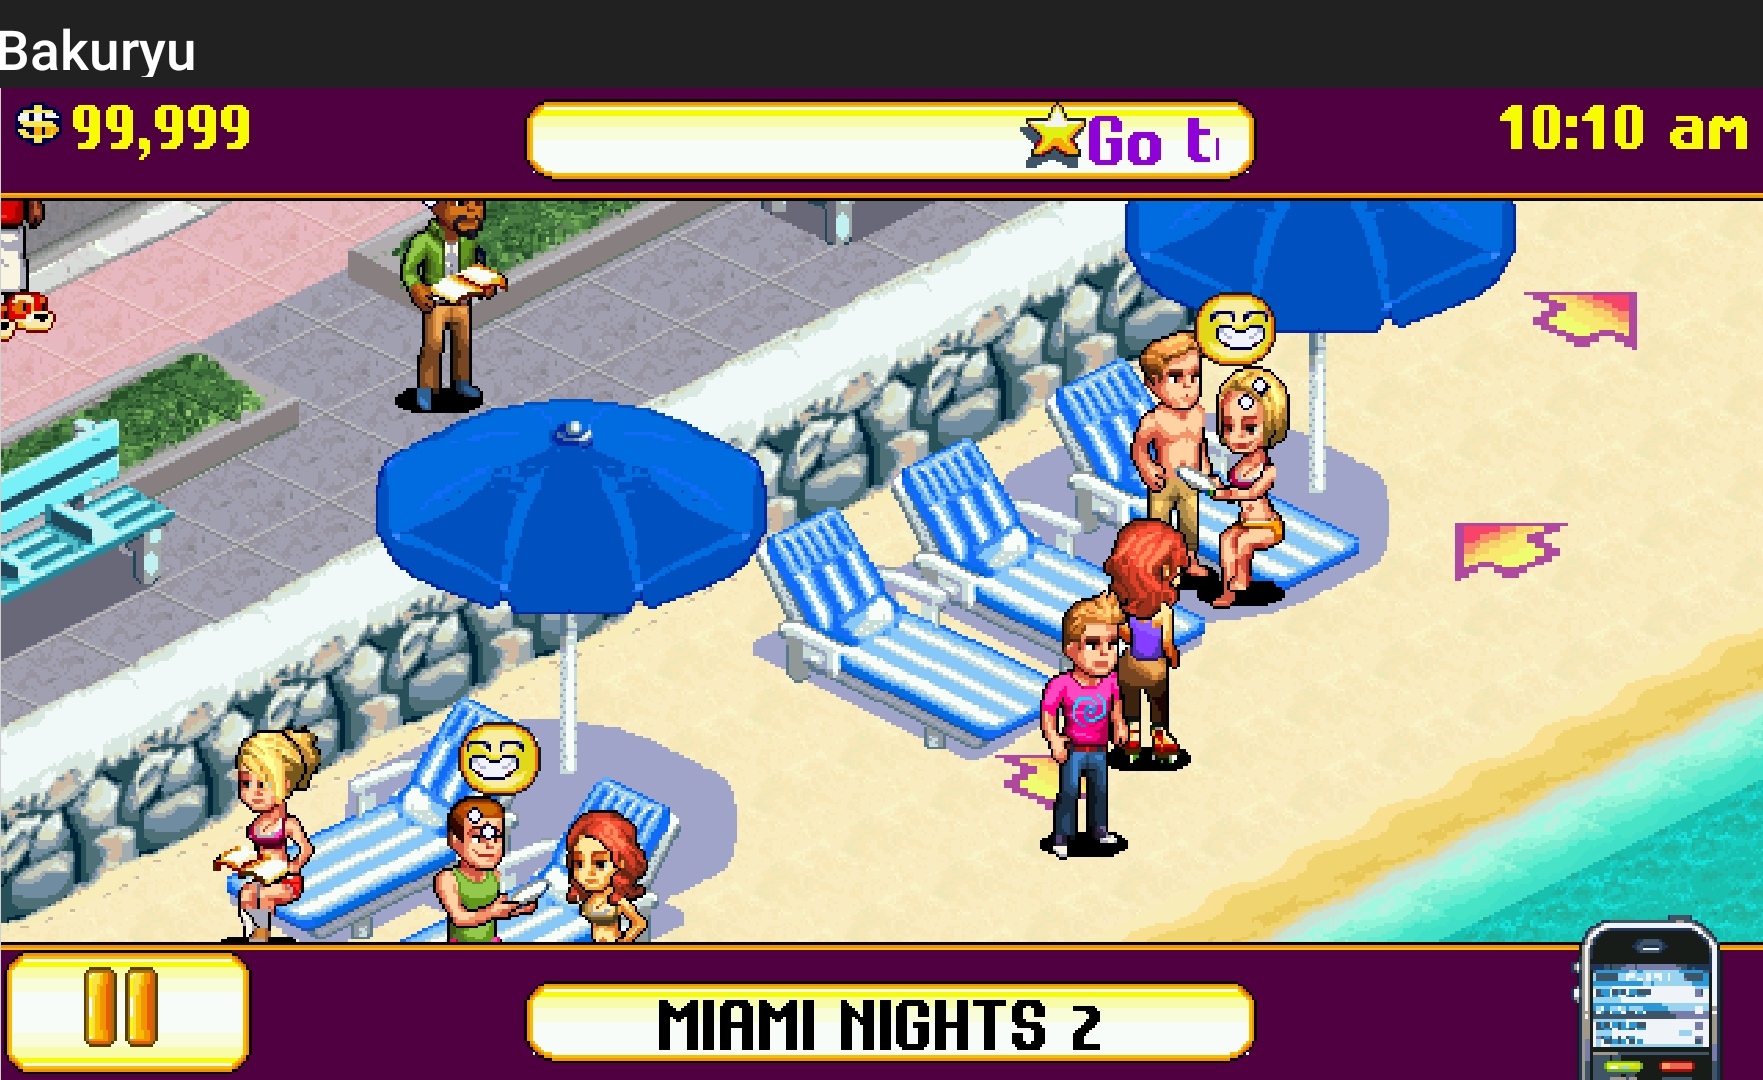 [SP Hack] Miami Nights 2 The City Is Yours Hack 99999 Tiền By Bakuryu